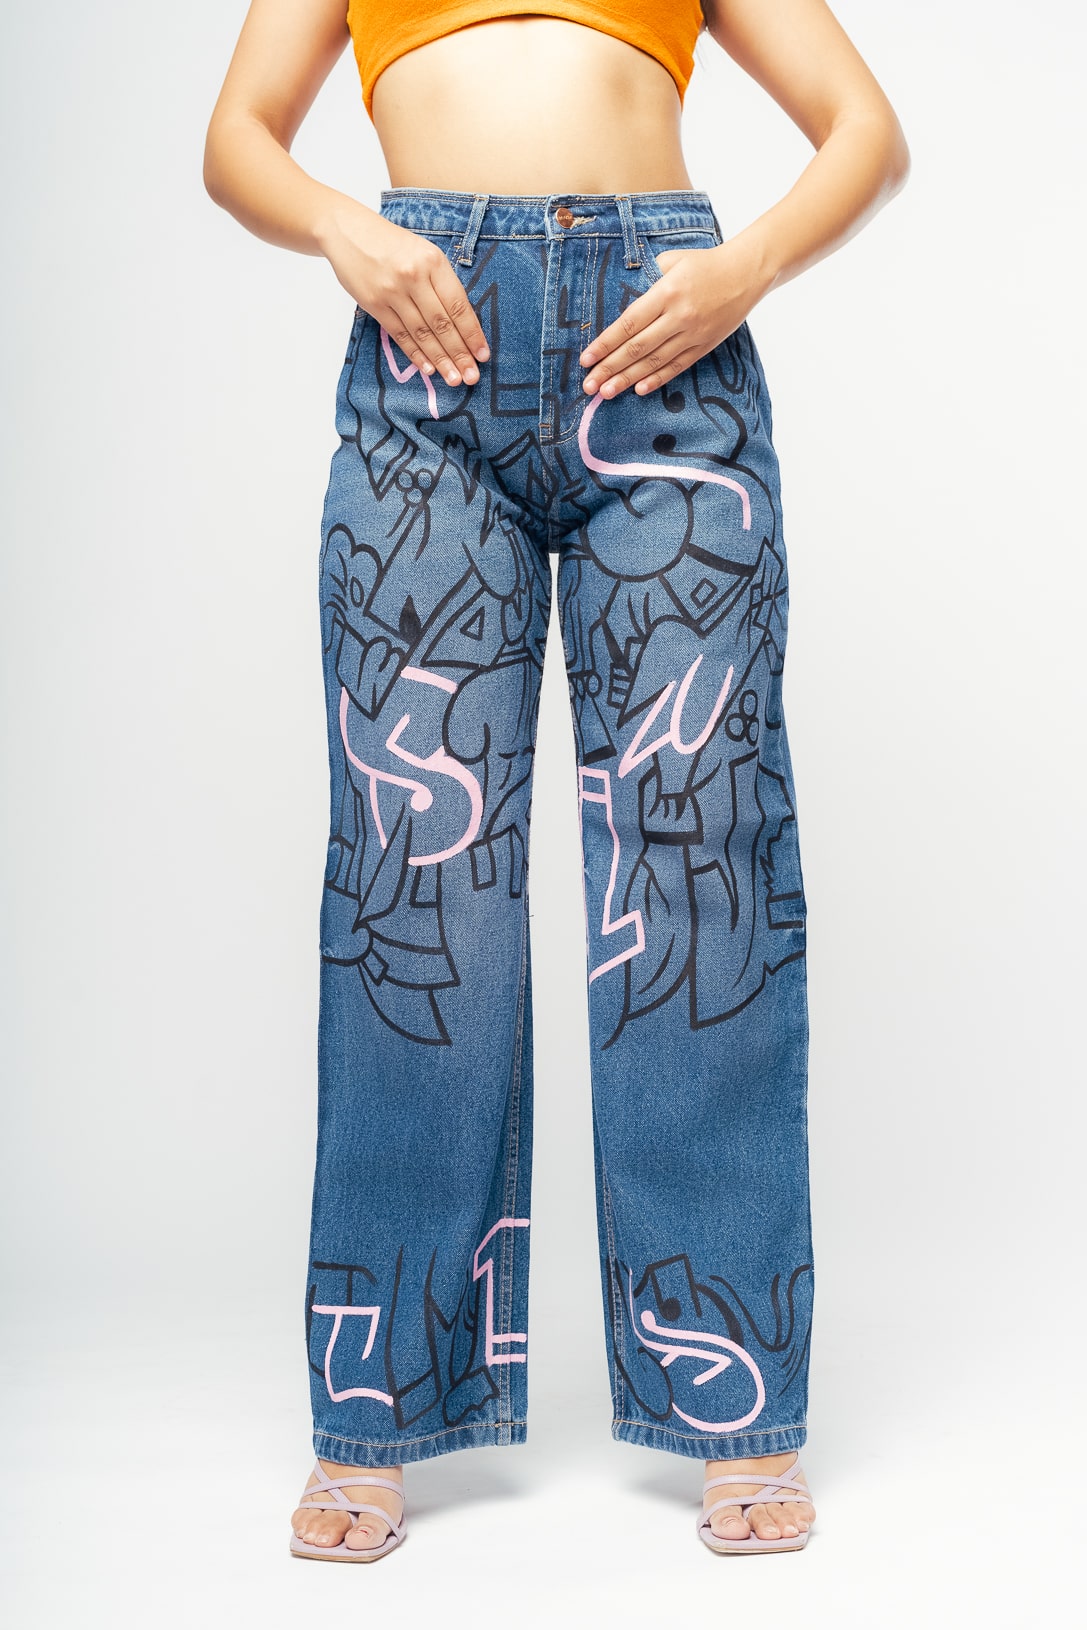 Bewildered jeans